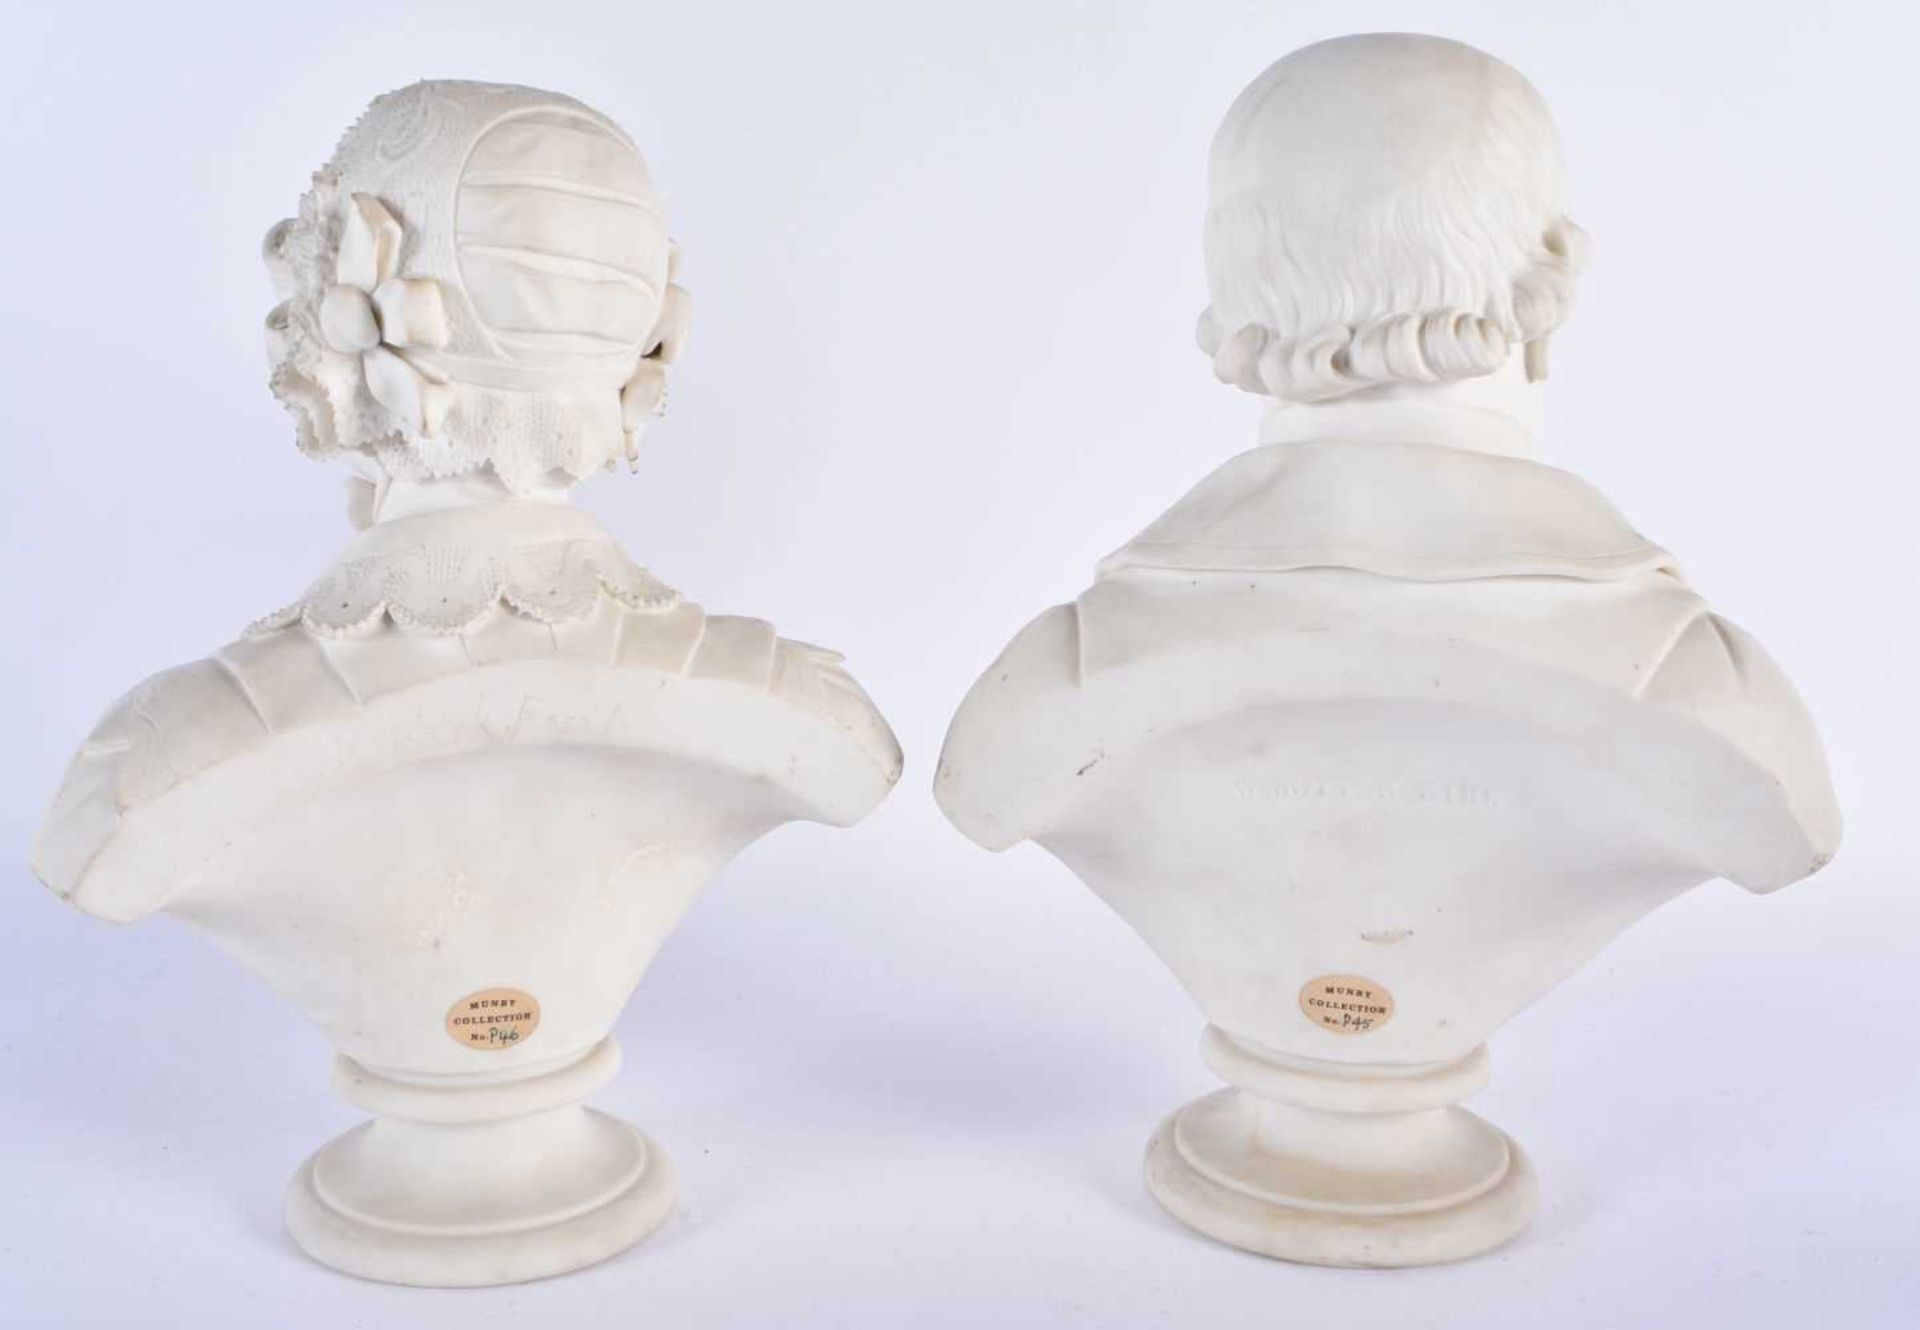 A PAIR OF 19TH CENTURY KERR & BINNS WORCESTER PARIAN WARE BUSTS modelled as a male and female. - Image 3 of 6